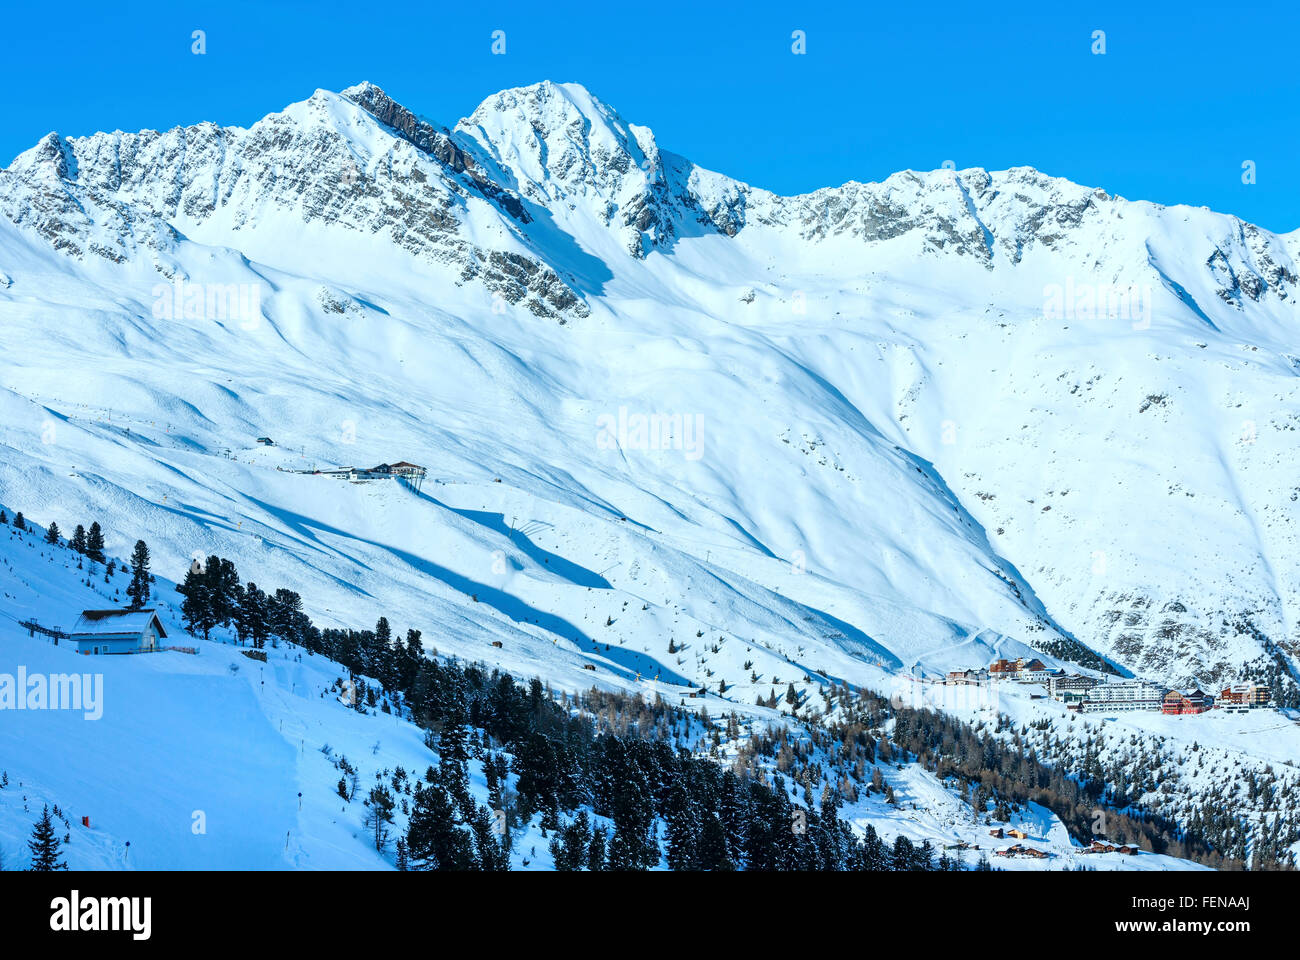 Scenery from the cabin ski lift at the snowy slopes (Tyrol, Austria). Stock Photo